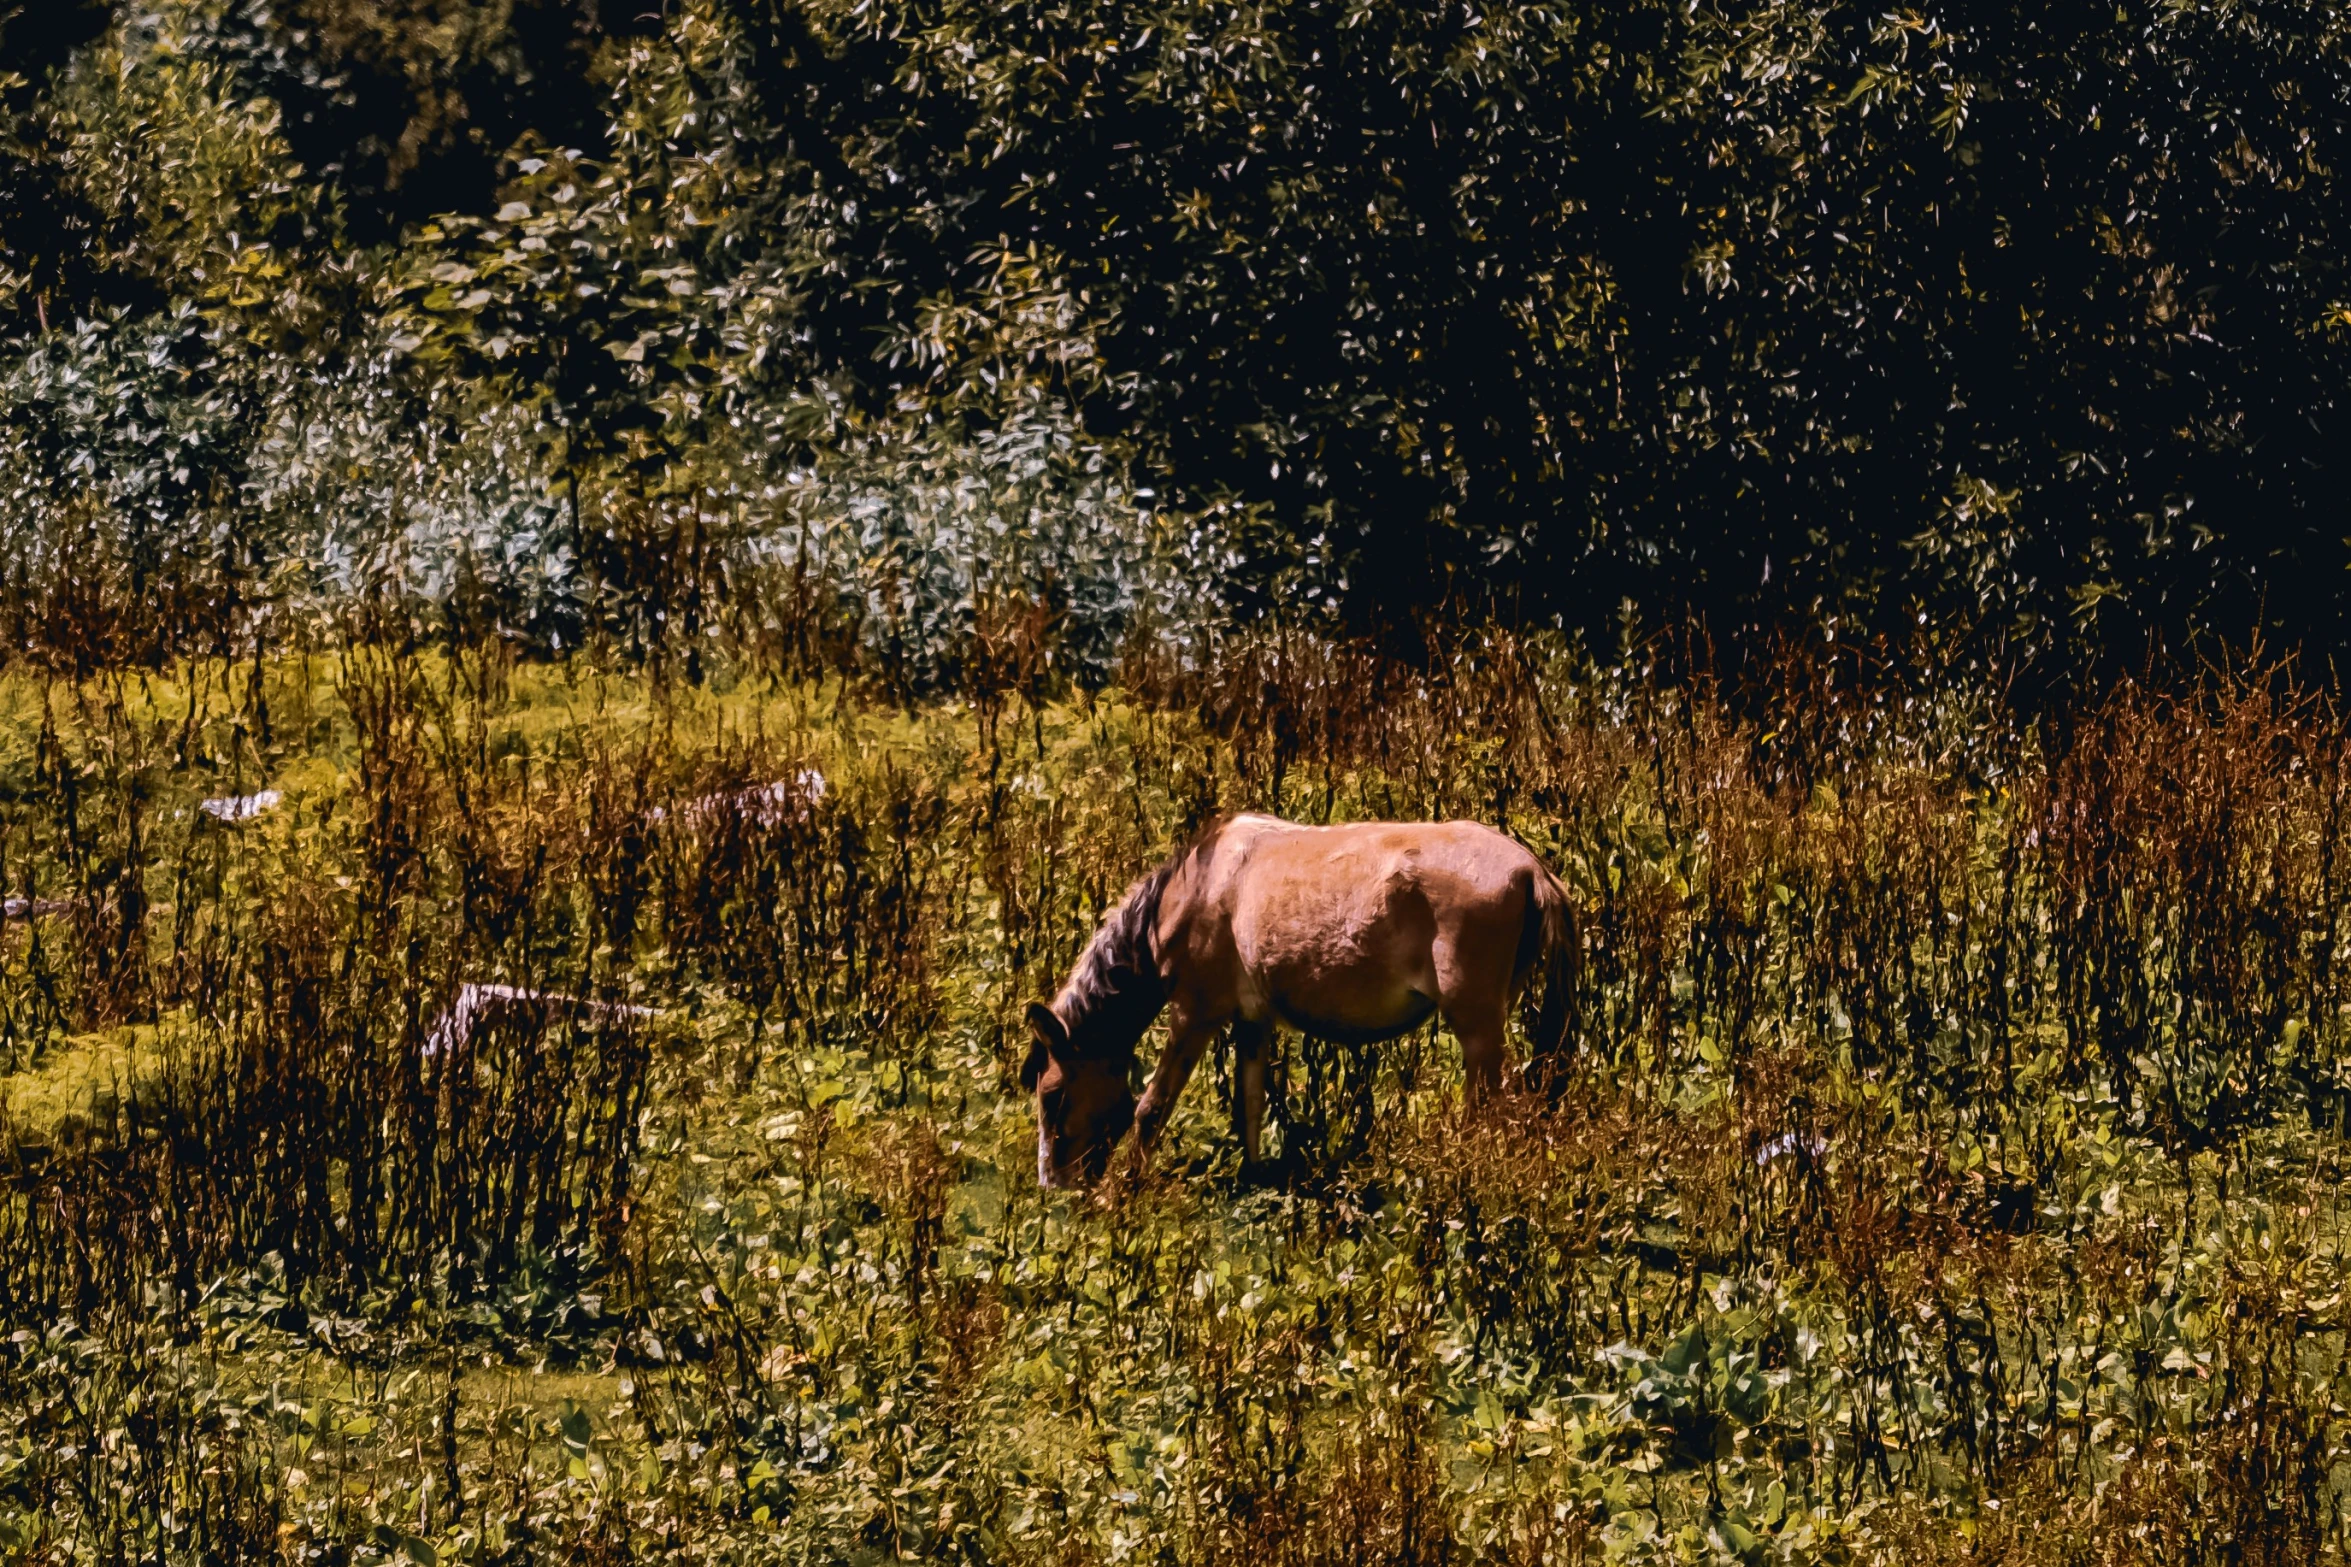 an animal is grazing in a grassy field